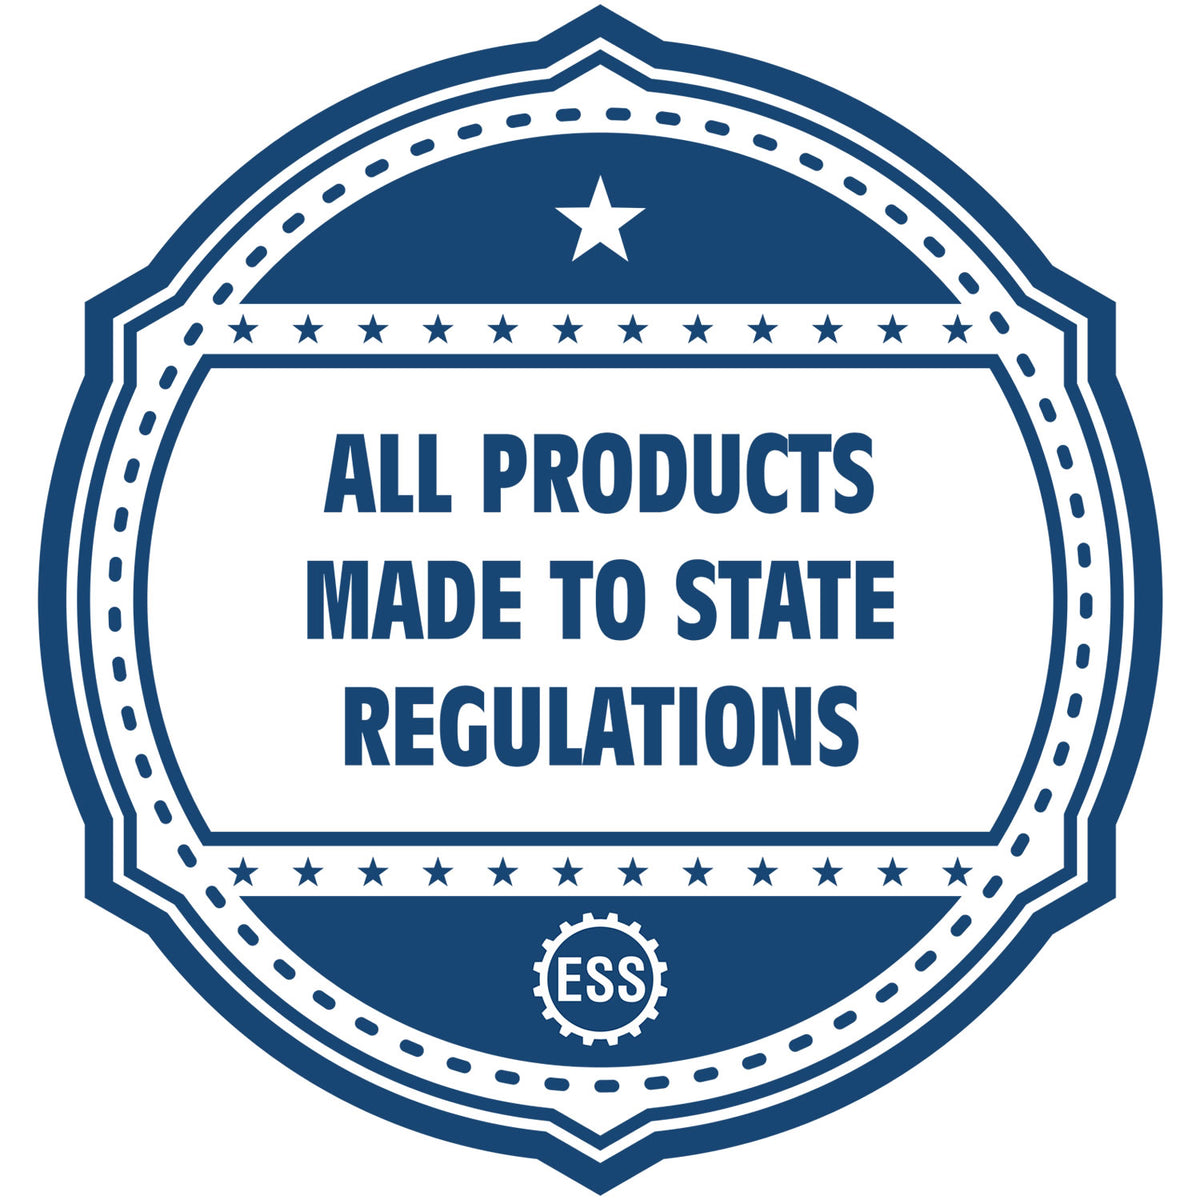 A blue icon or badge for the Slim Pre-Inked North Carolina Professional Geologist Seal Stamp showing that this product is made in compliance with state regulations.